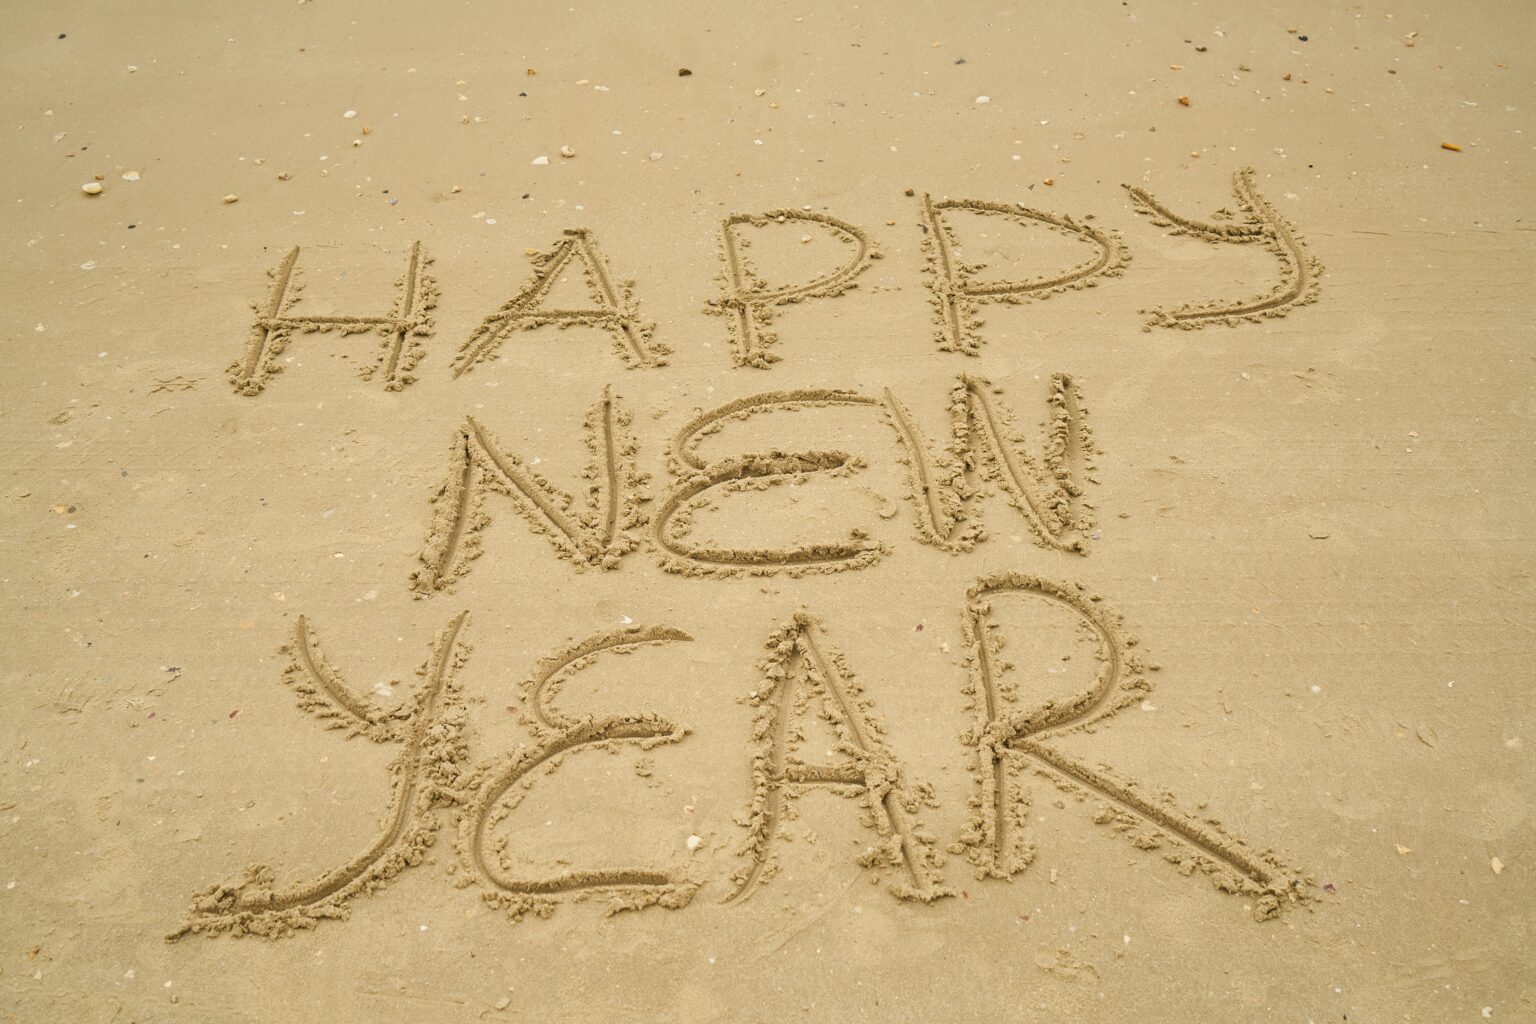 Happy New Year written in the sand at the beach.